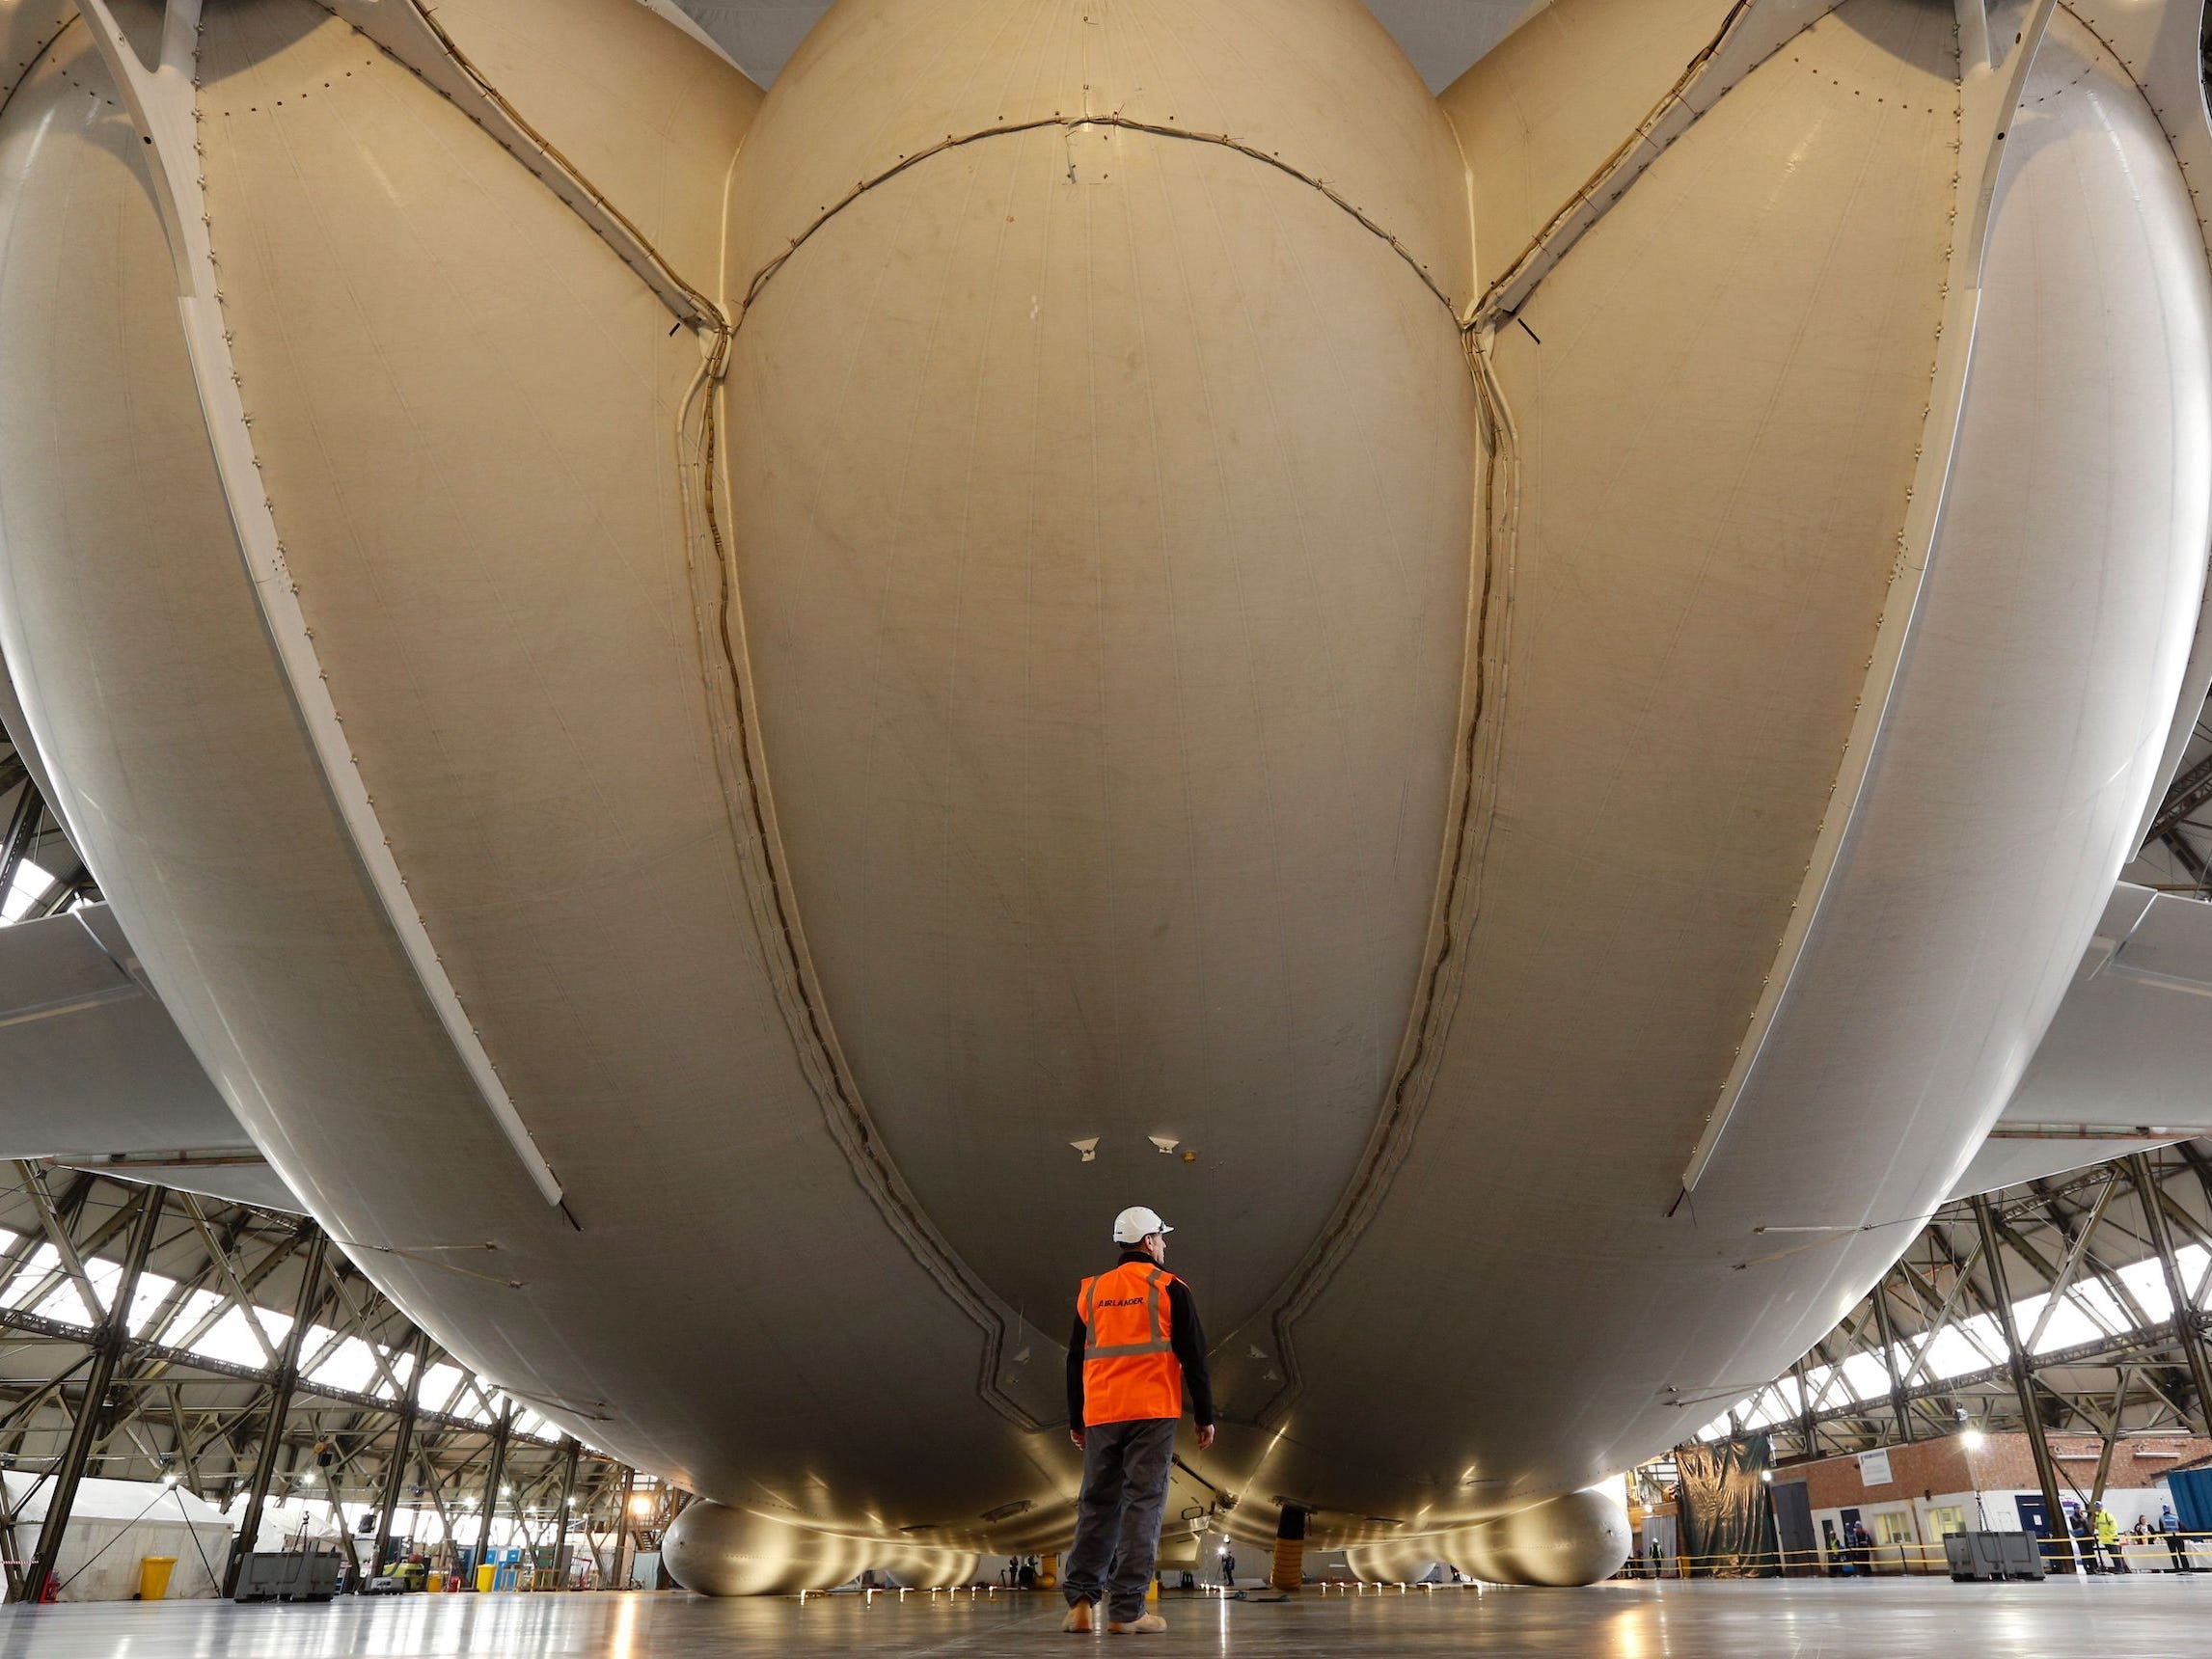 the exterior of the Airlander 10 in a hangar with someone walking by